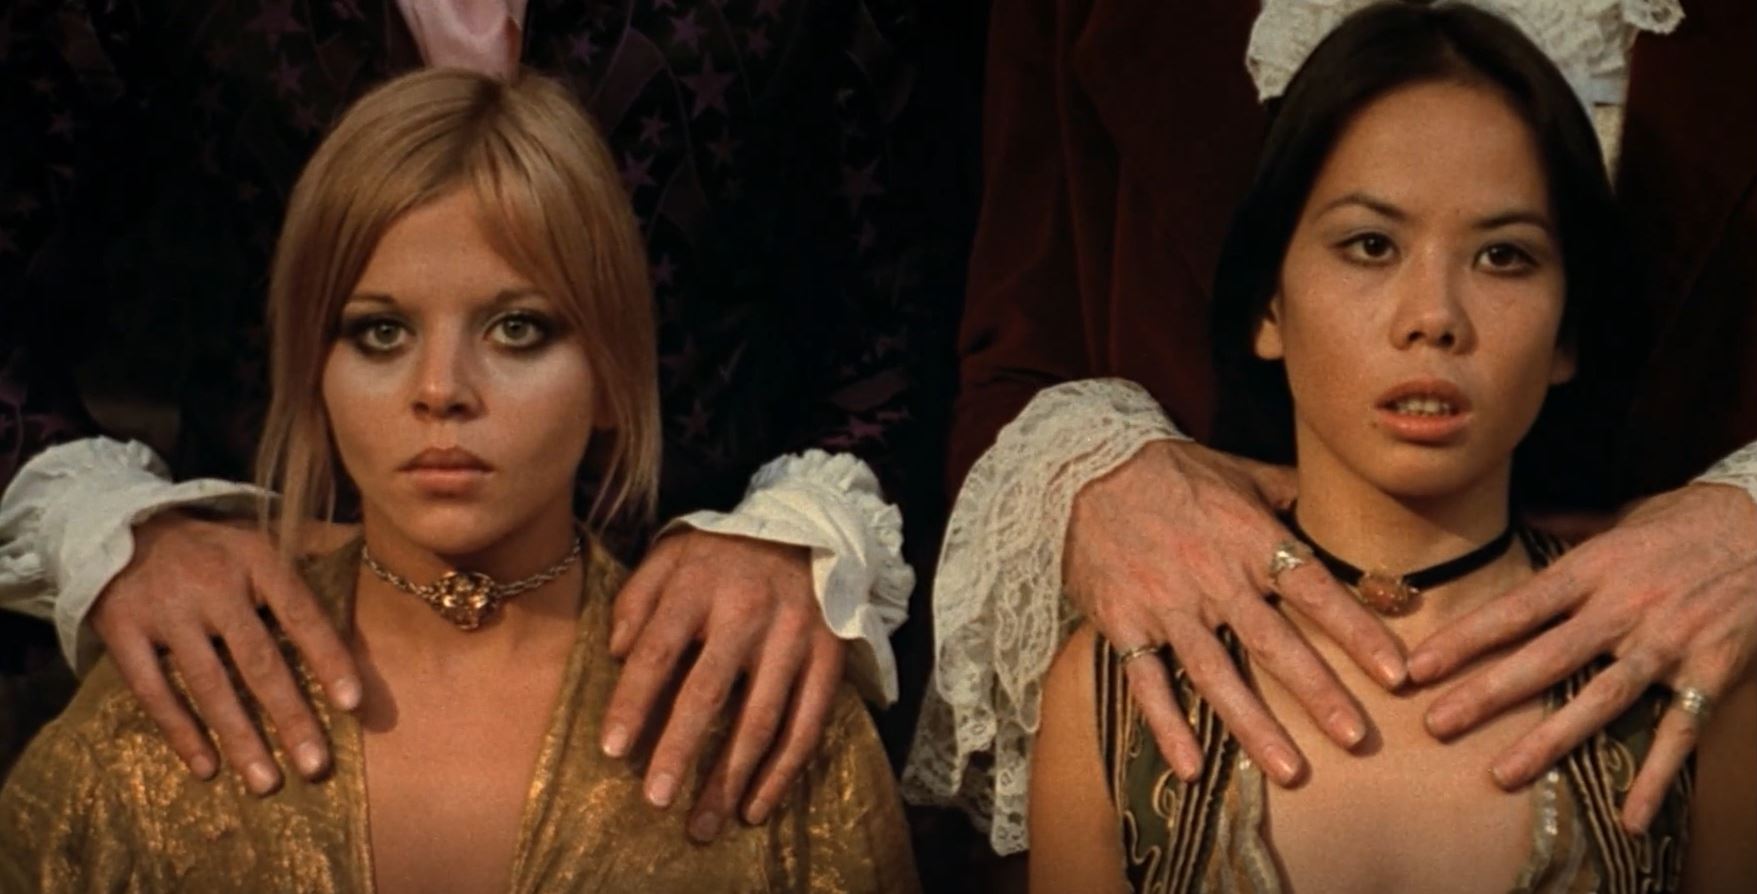 Scene from The Shiver of the Vampires (1971)